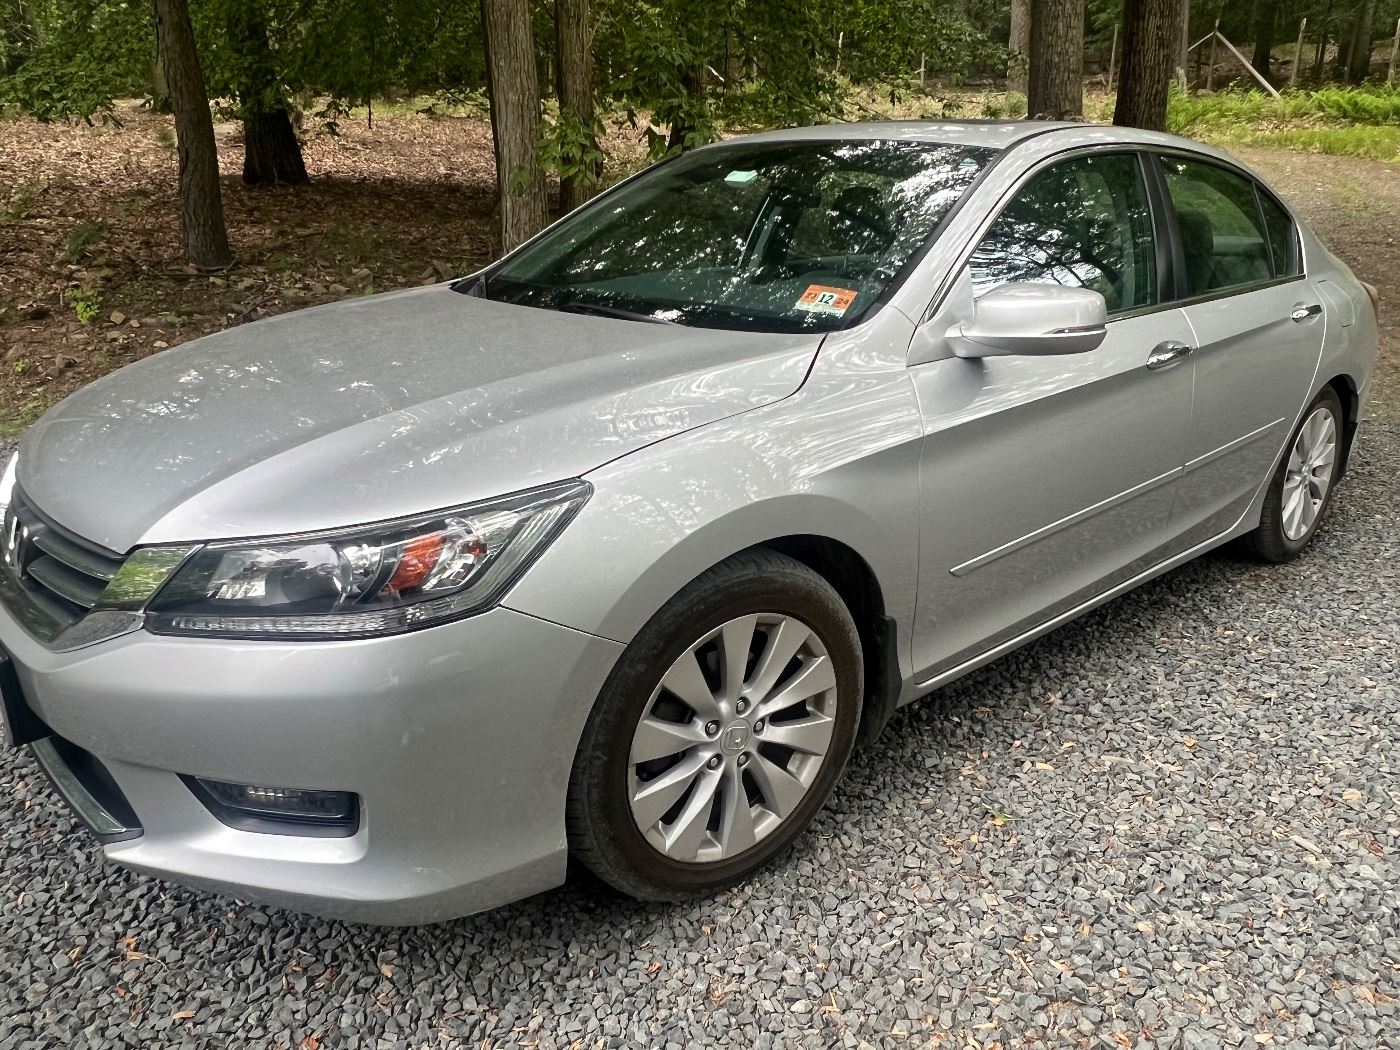 HIGHEST & BEST OFFER BY 3:00 PM SATURDAY.

2014 HODA ACCORD